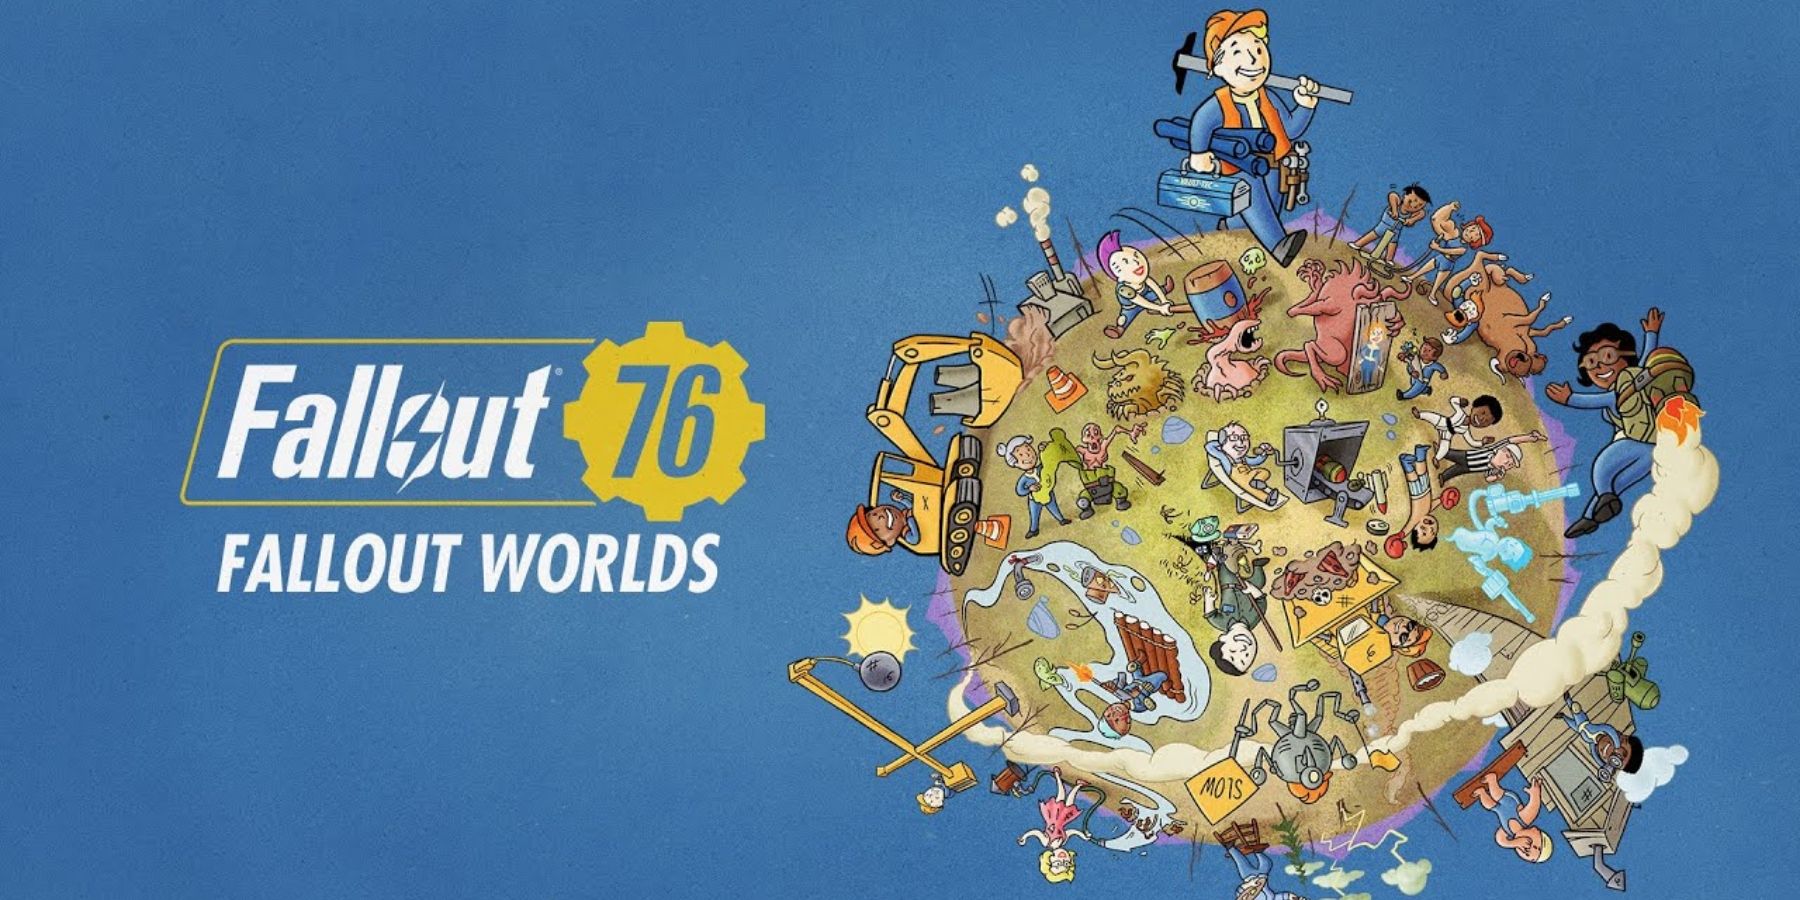 Fallout 76's Fallout Worlds Update is Out Now